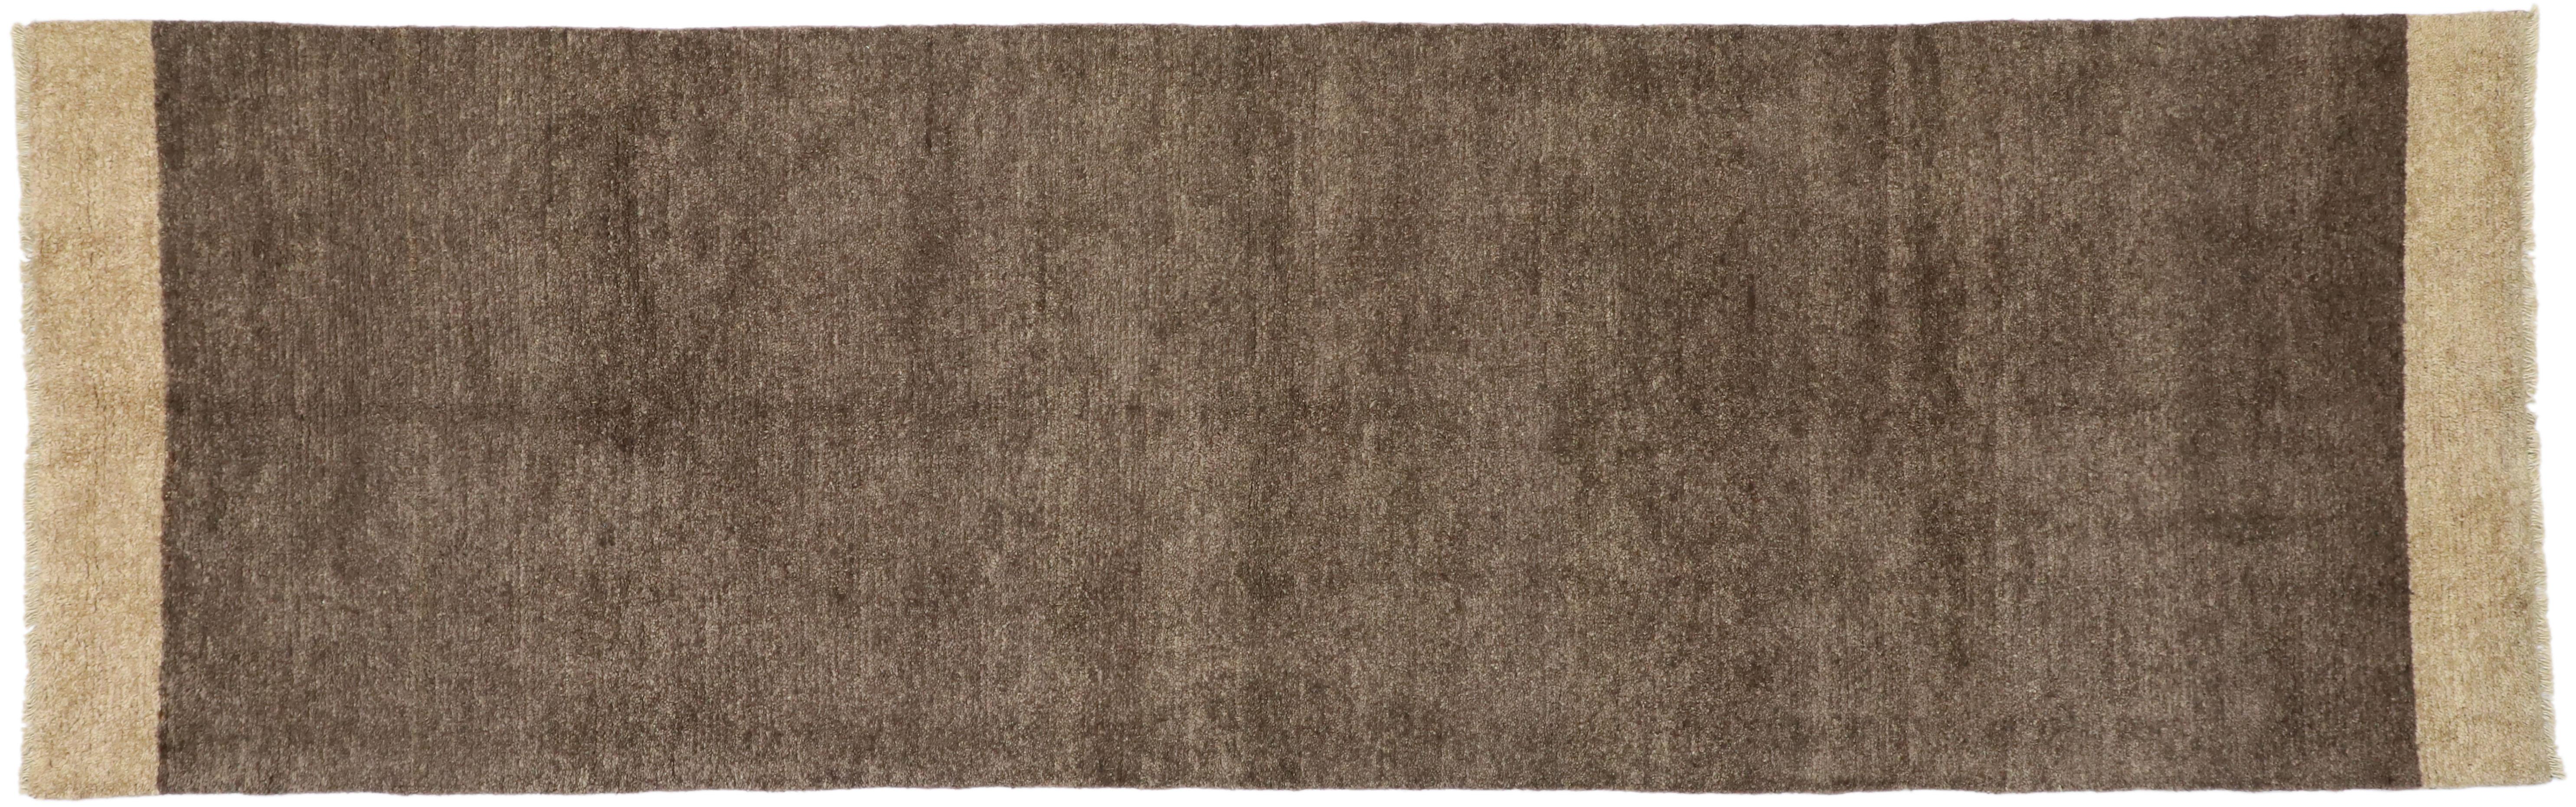 New Contemporary Moroccan Runner with Minimalist Shaker Style For Sale 3